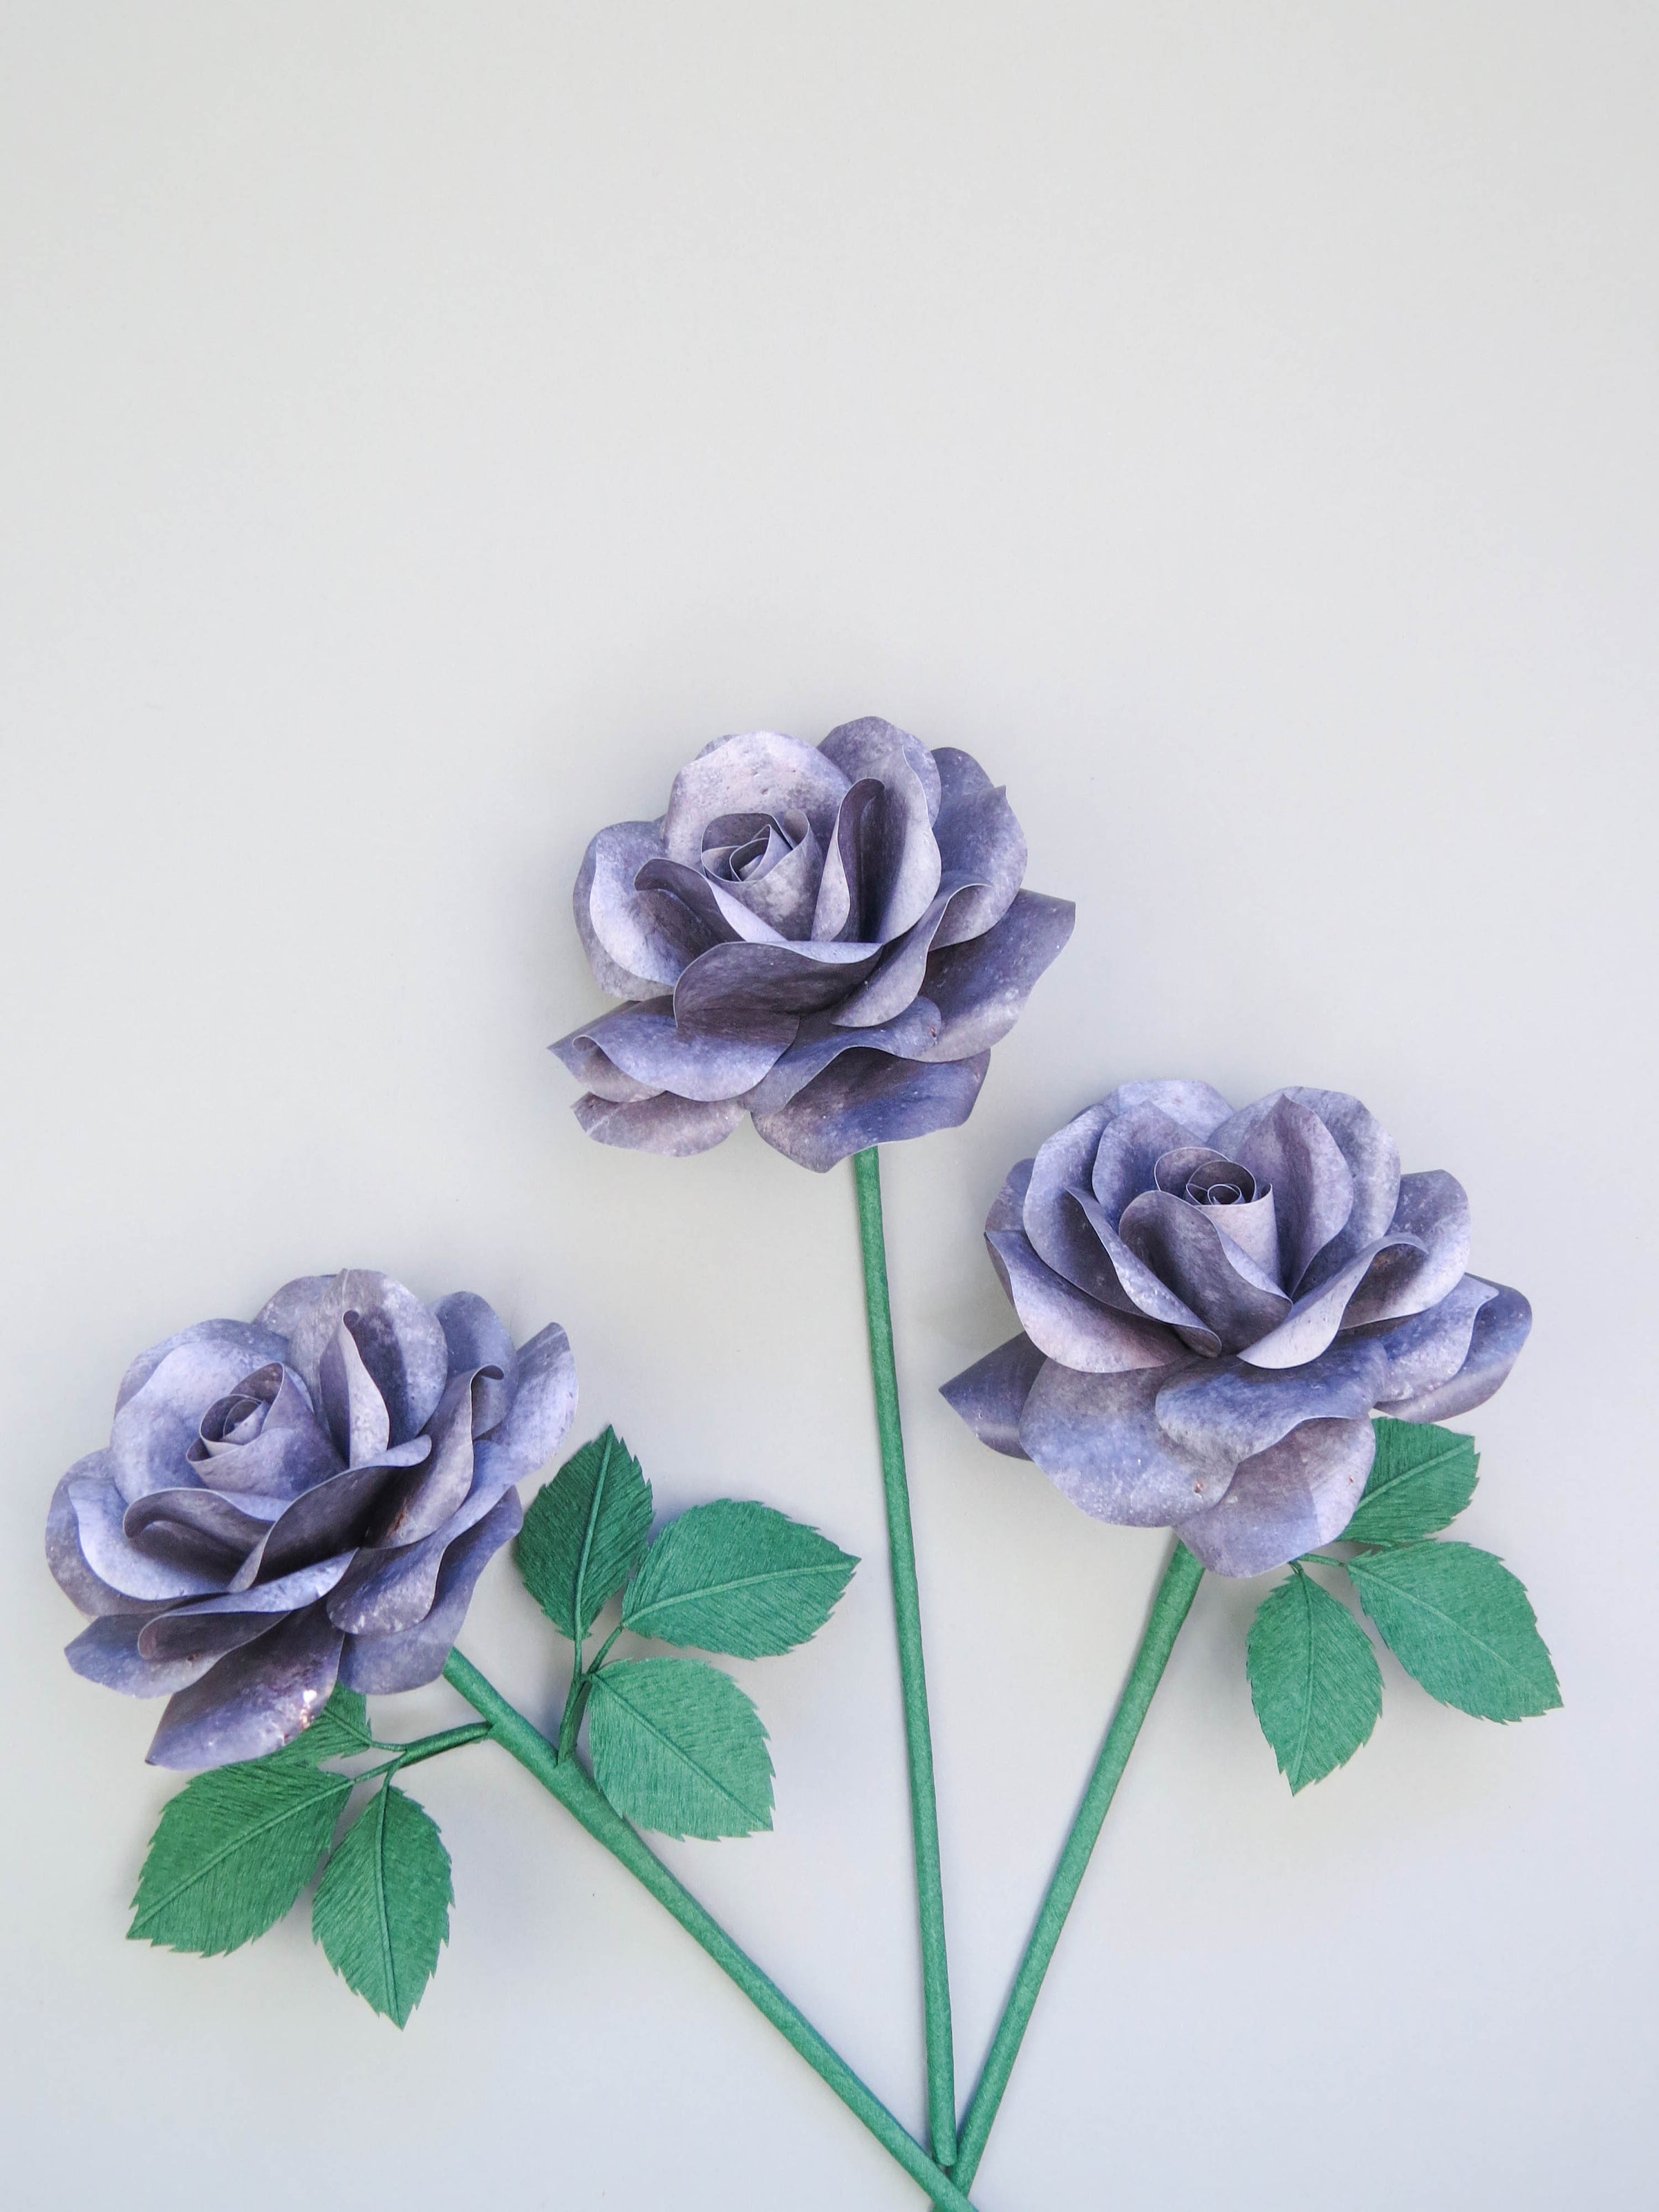 Three grey iron paper roses randomly lying next to each other on a light grey background. The left rose has six green leaves attached, the middle rose has no leaves and the right rose has three leaves.